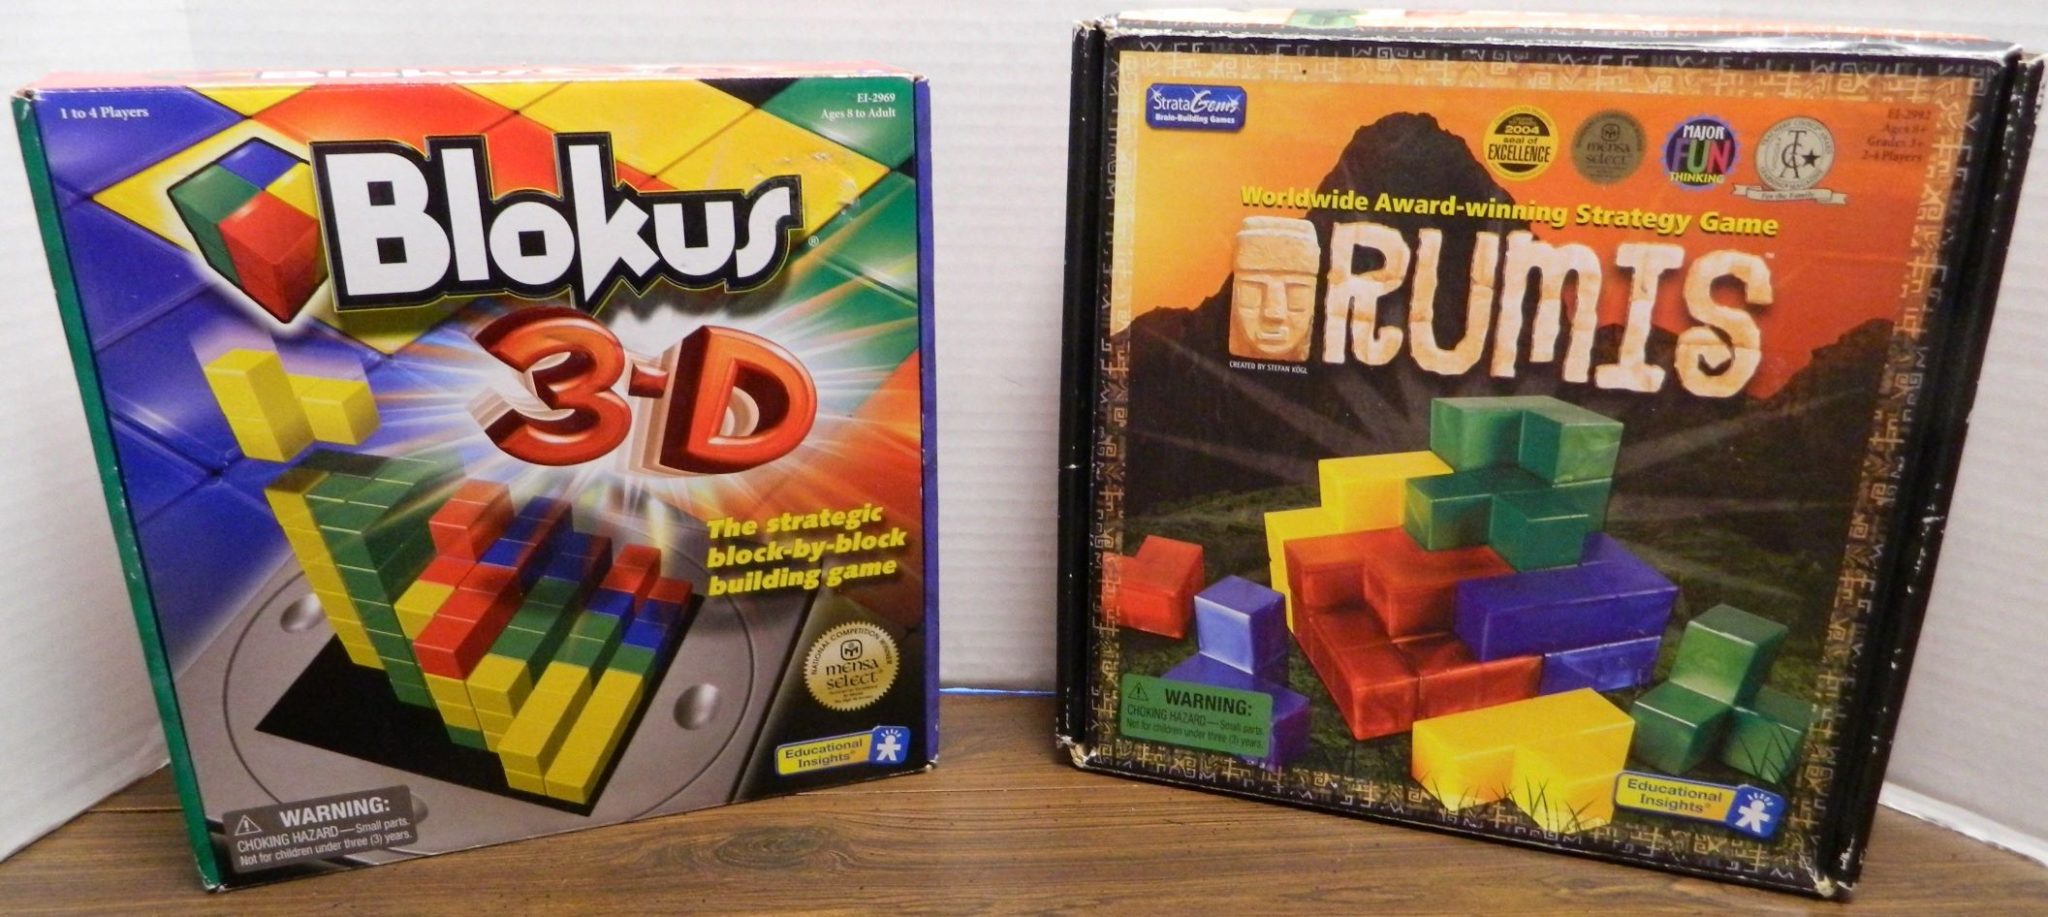 Blokus 3D AKA Rumis Board Game Review and Rules